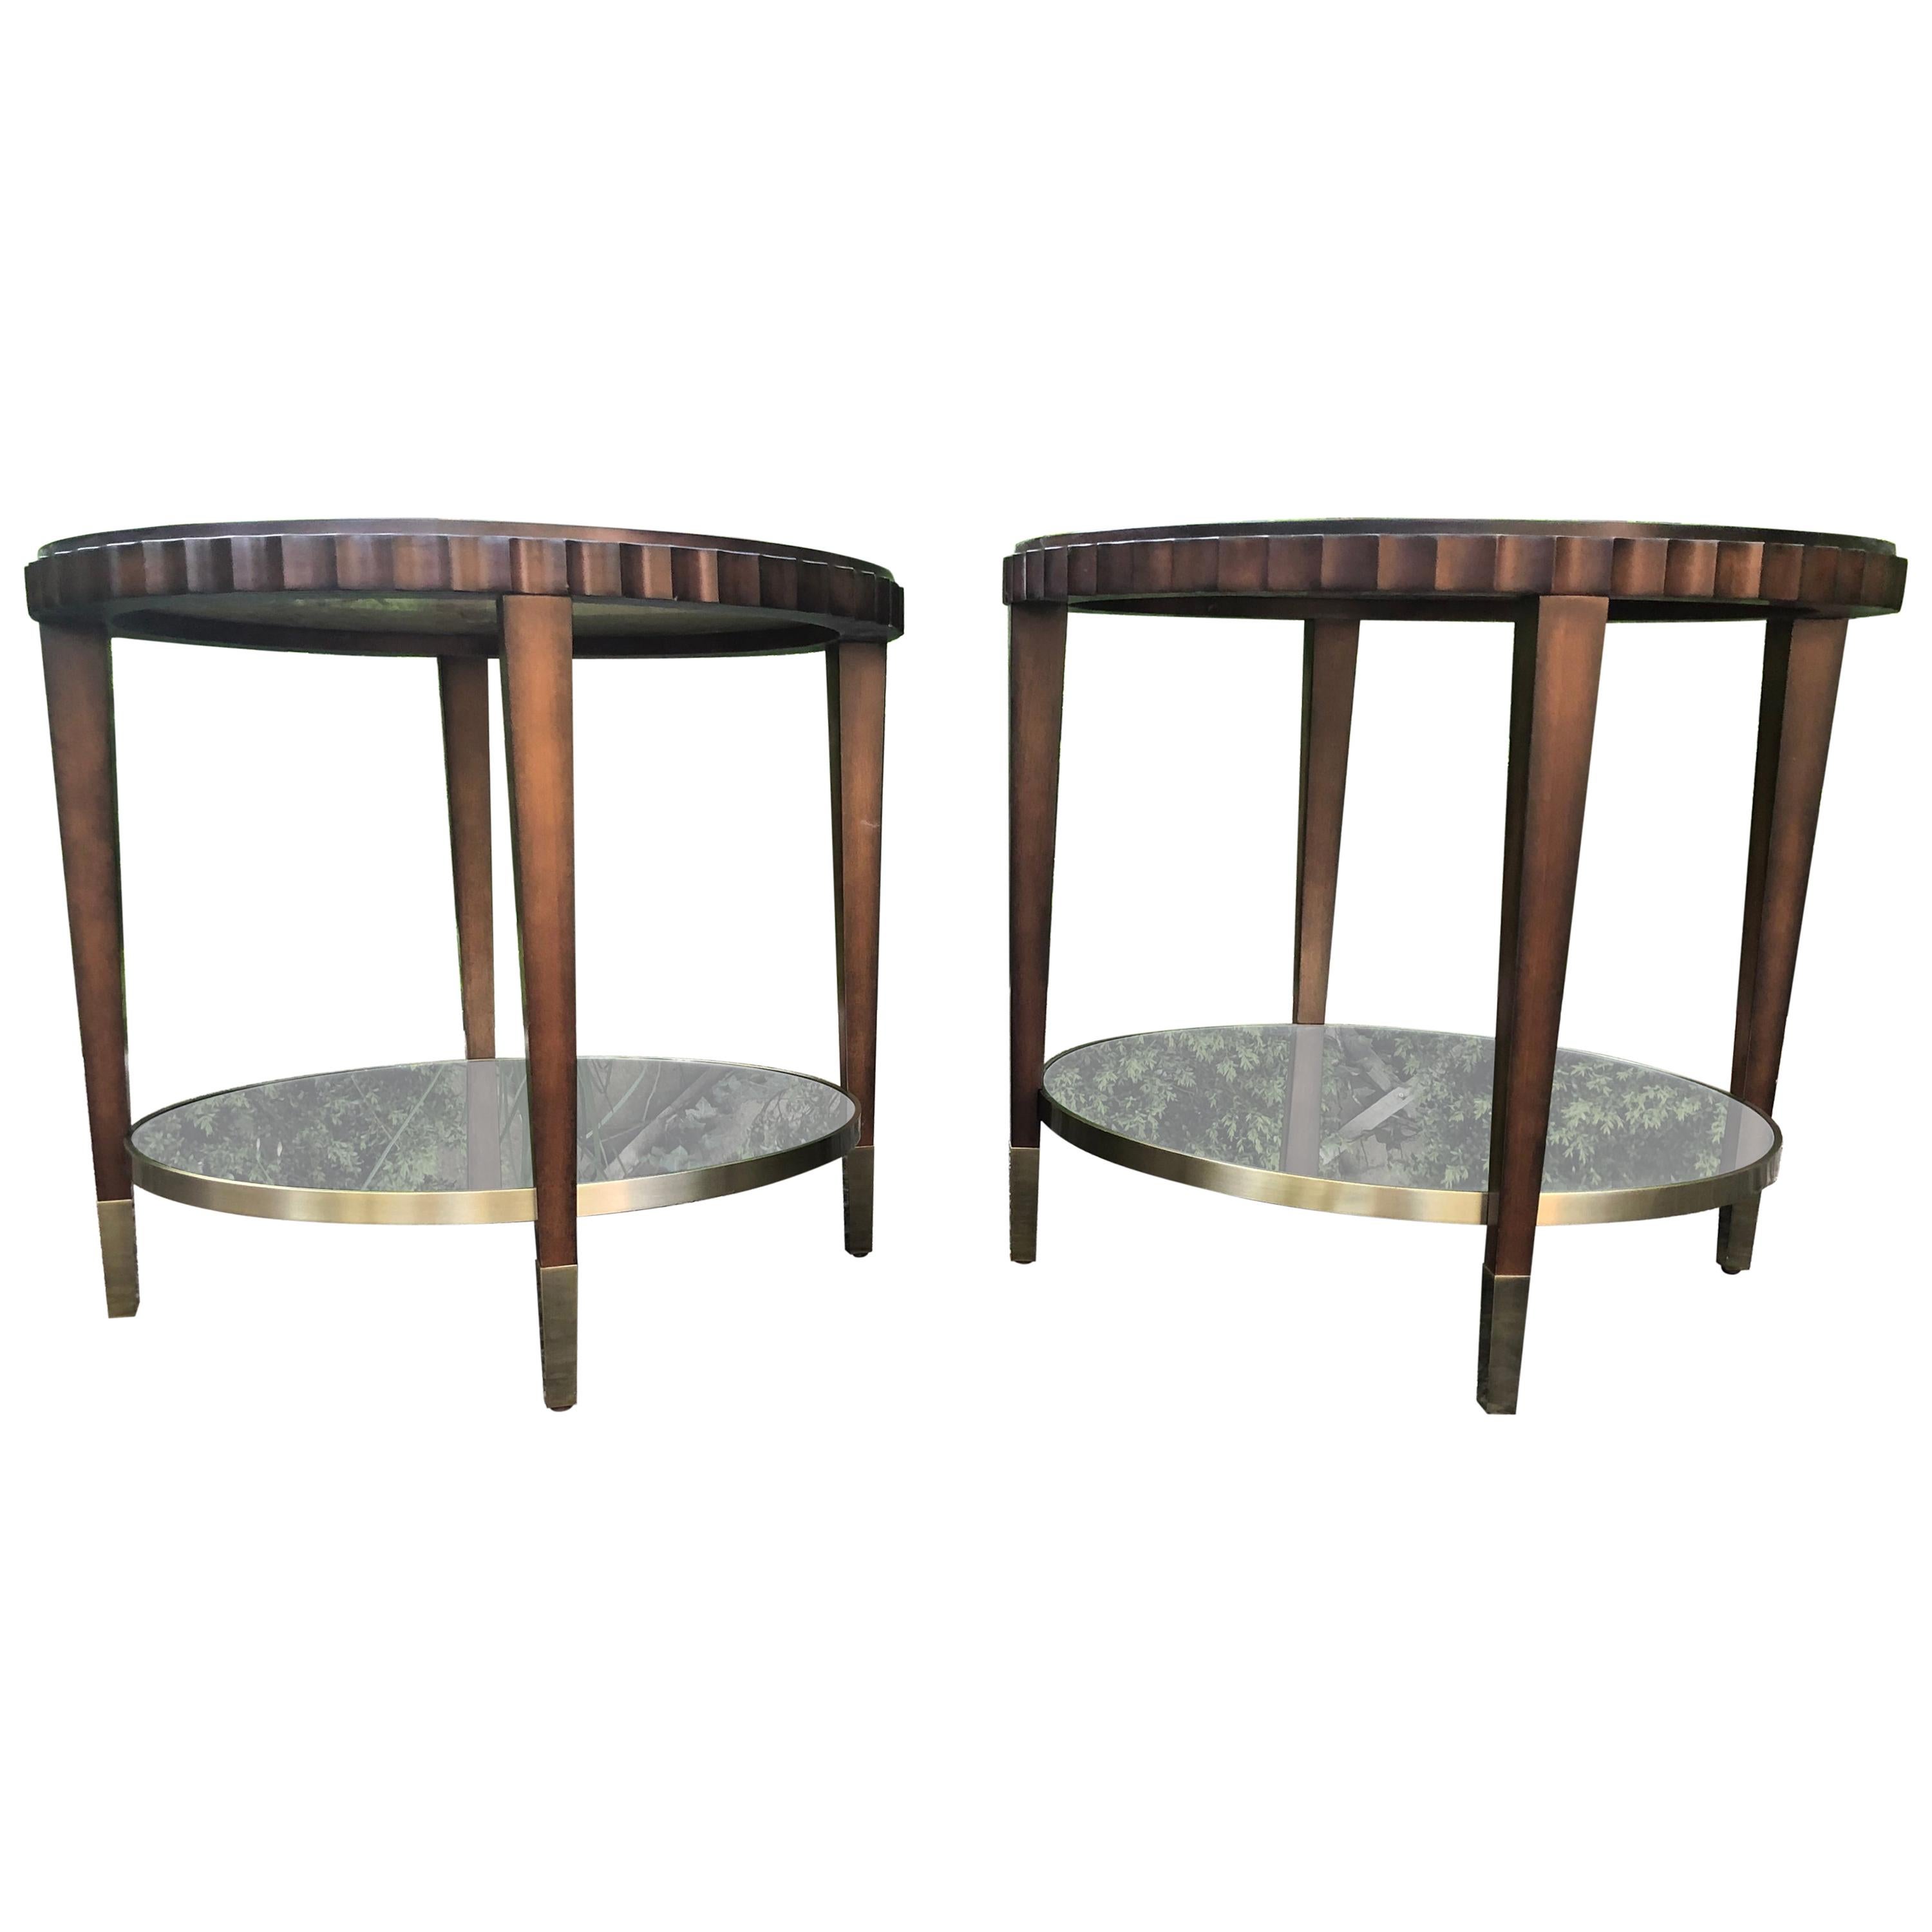 Beautiful Pair of Round Mahogany Side Tables with Mirrored Lower Tiers